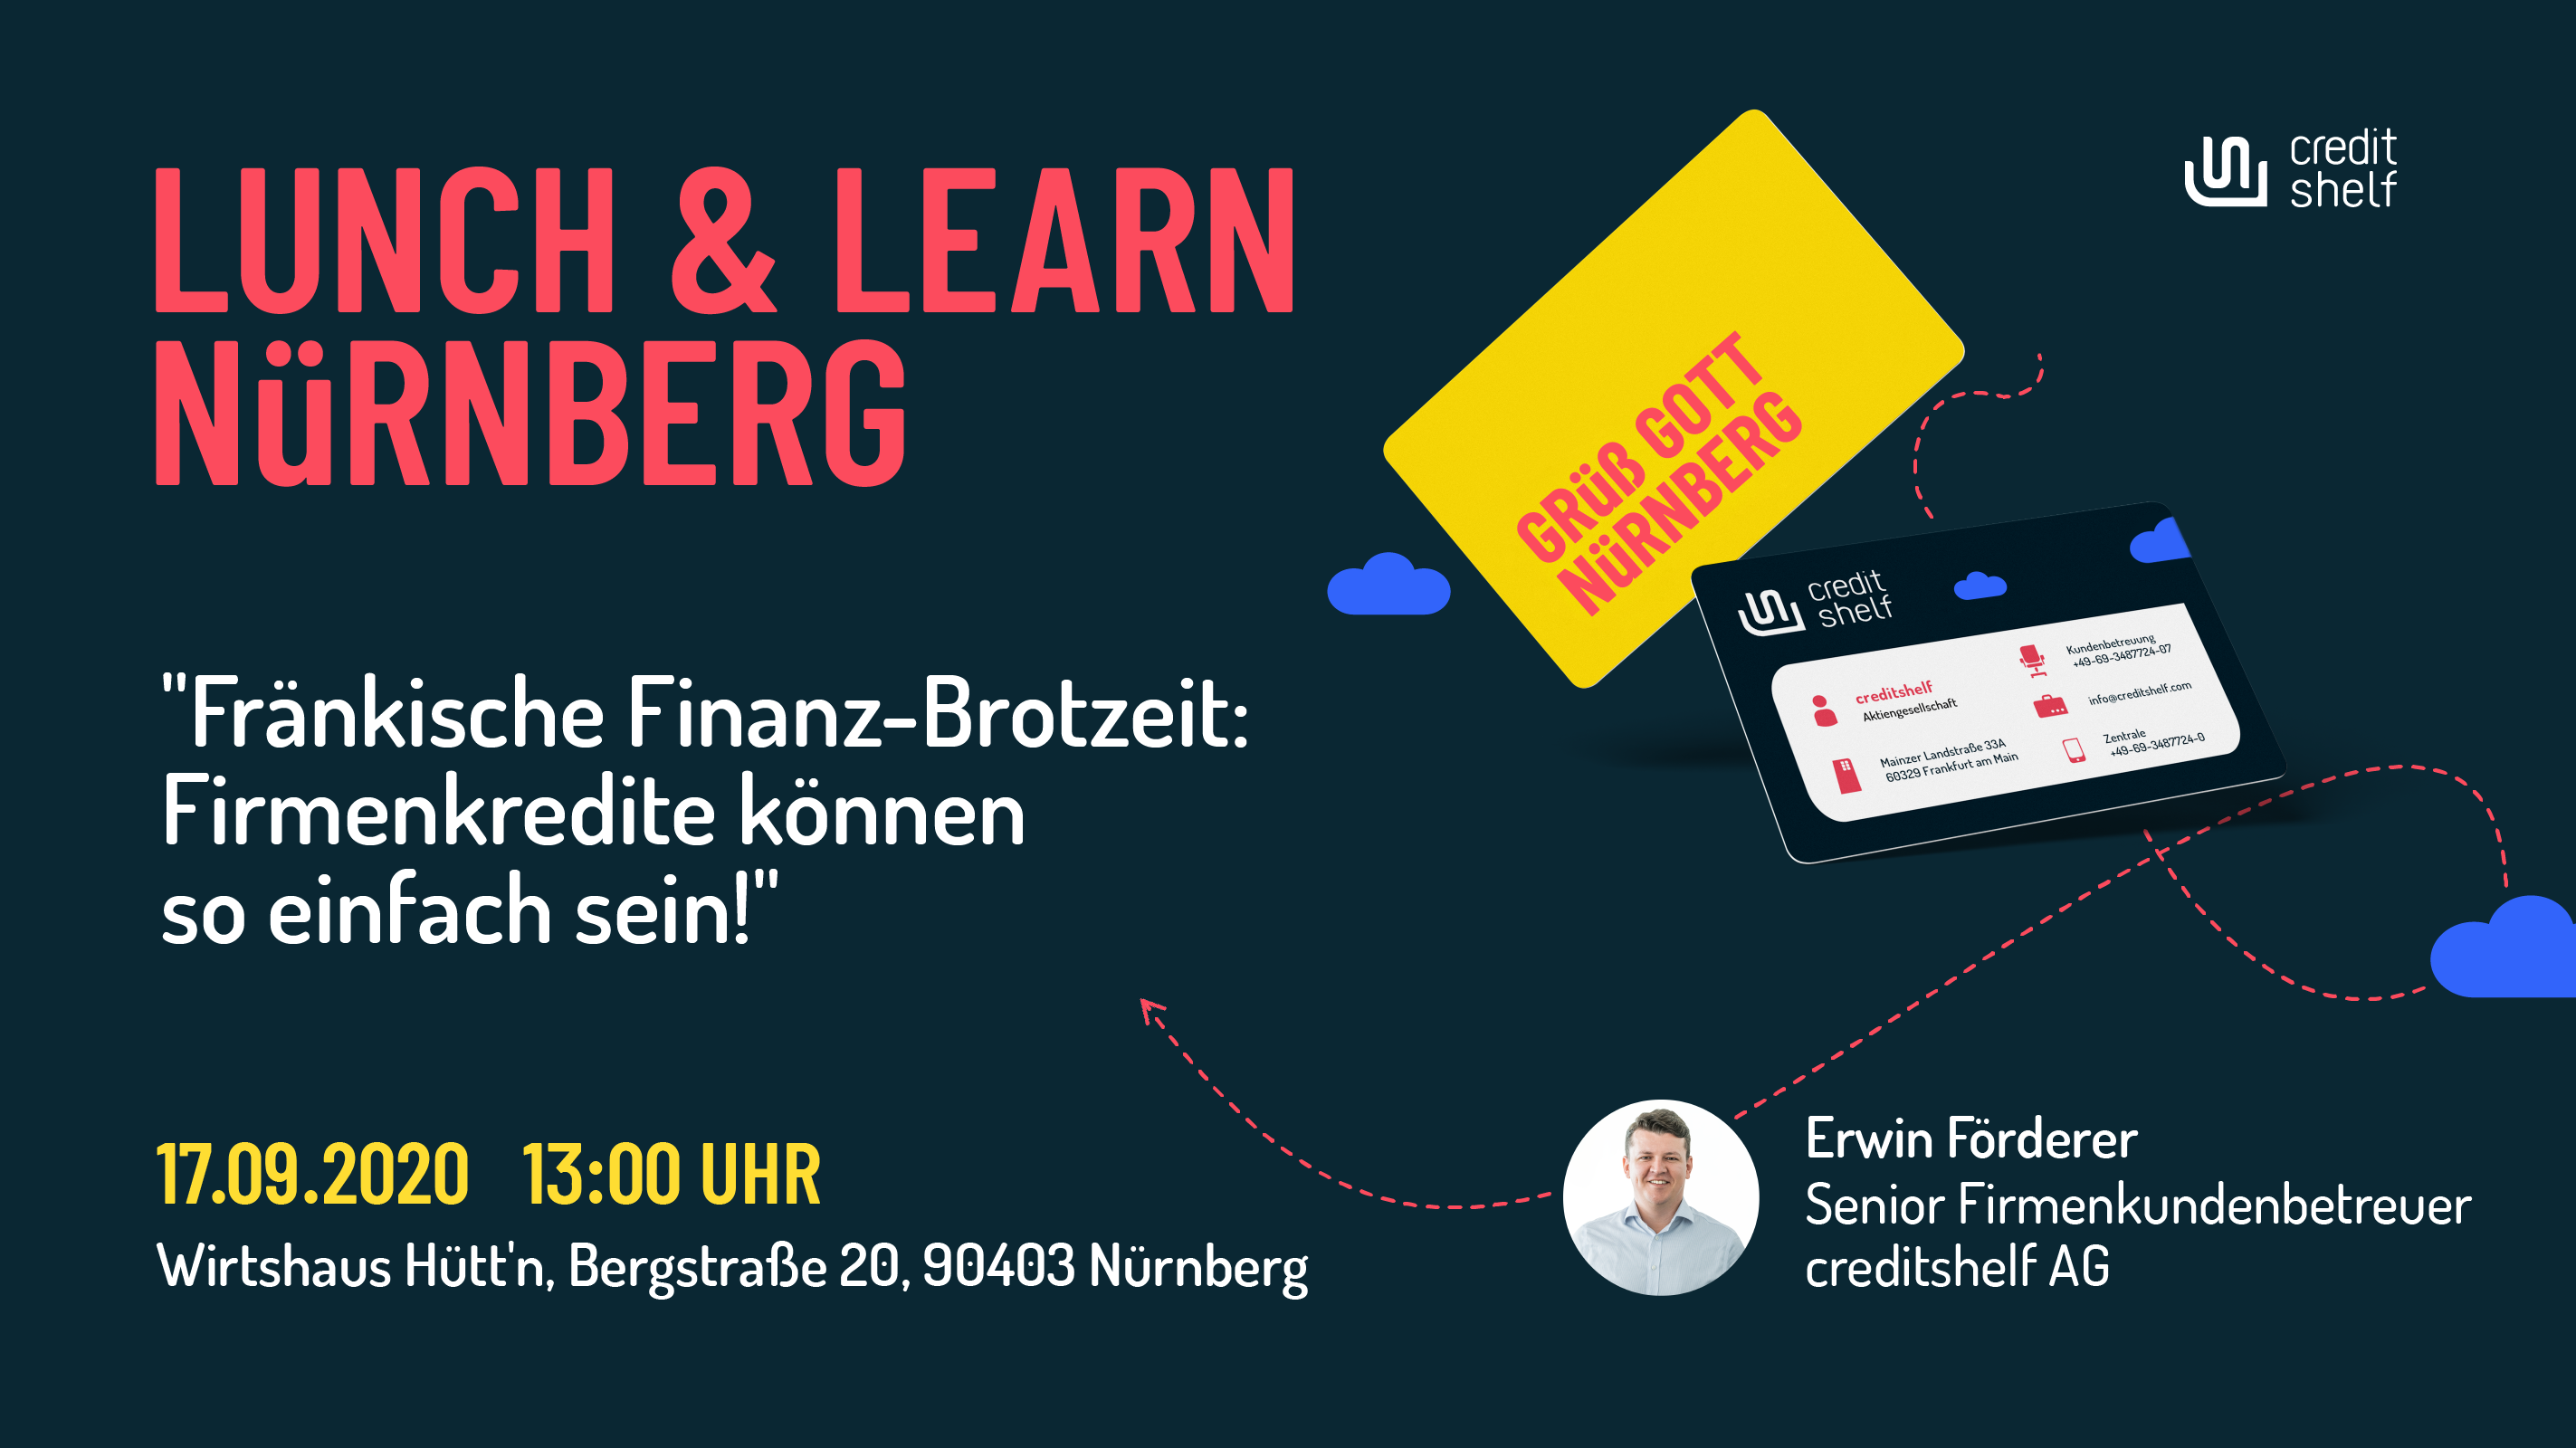 LUNCH AND LEARN NÜRNBERG